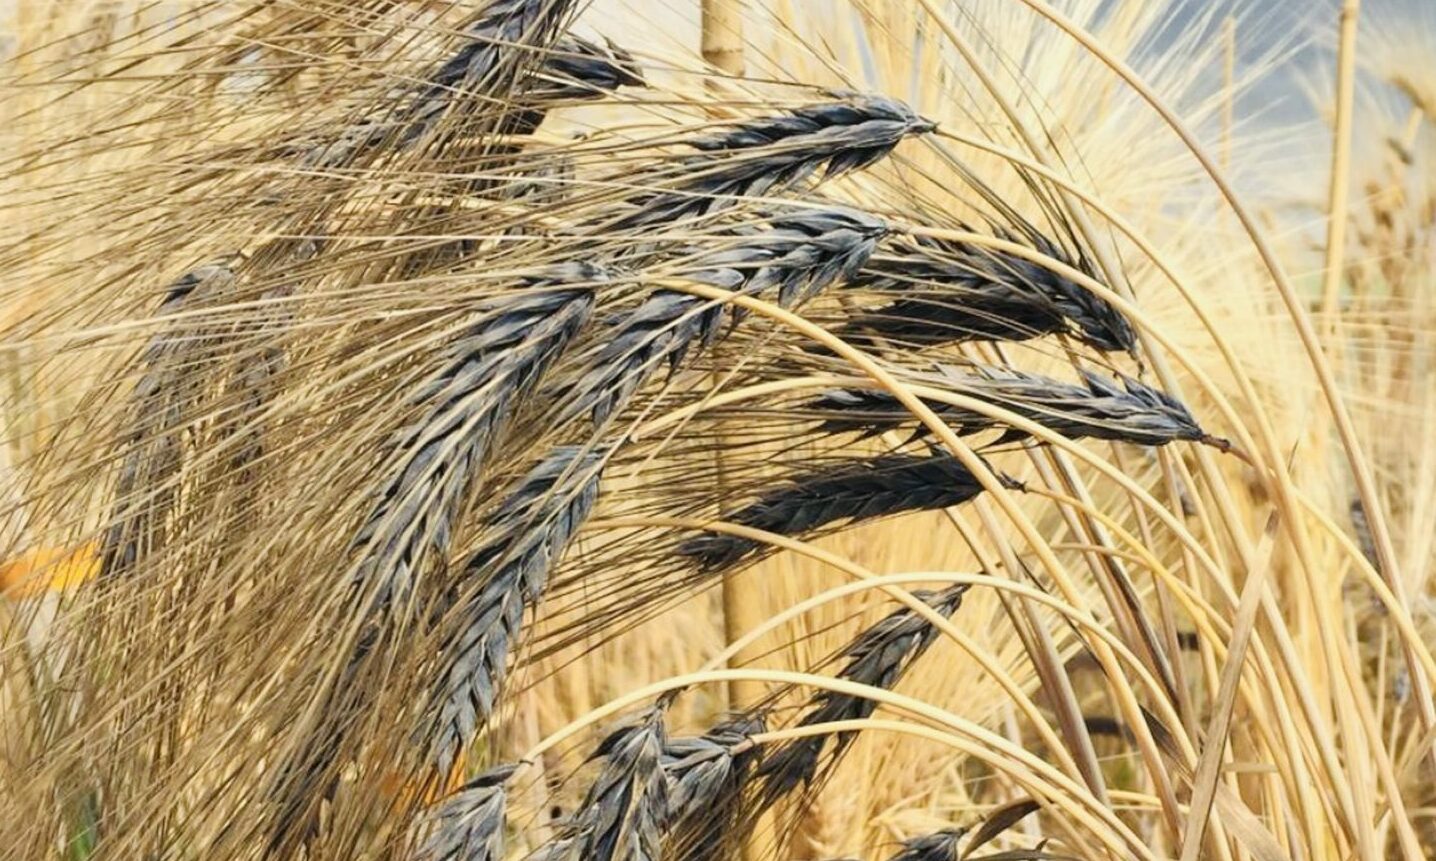 The black barley could contain properties which lower people's risk of type 2 diabetes. Image: Wendy Russell/ Rowett Institute